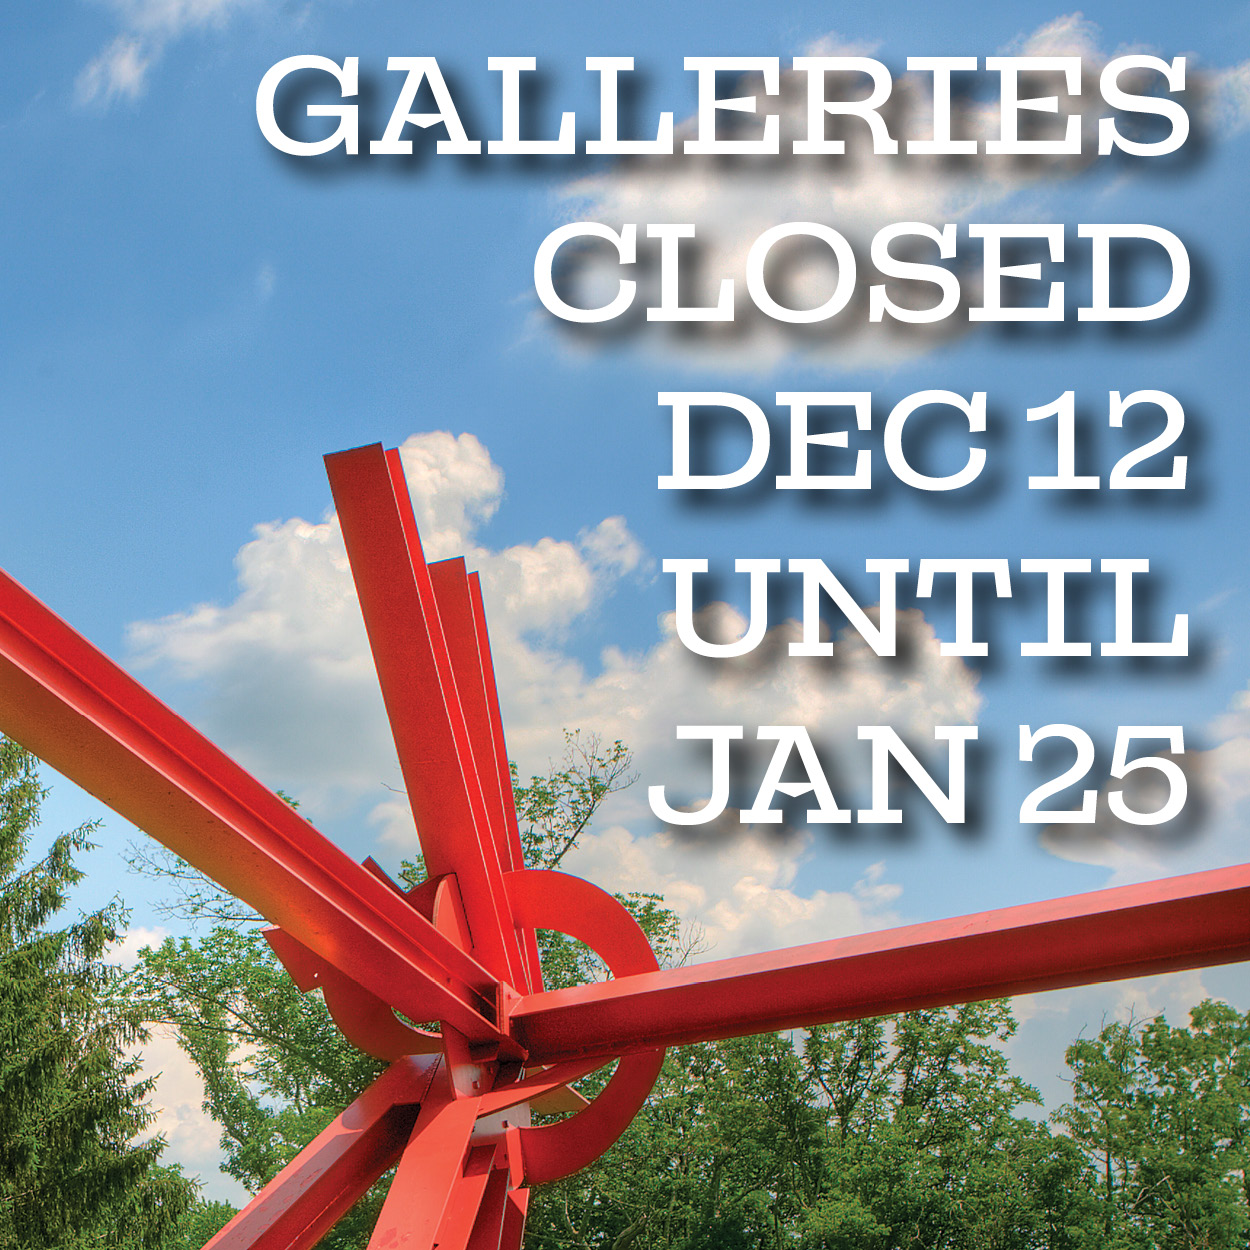 Our galleries are closed Dec 12-Jan 25, 2022